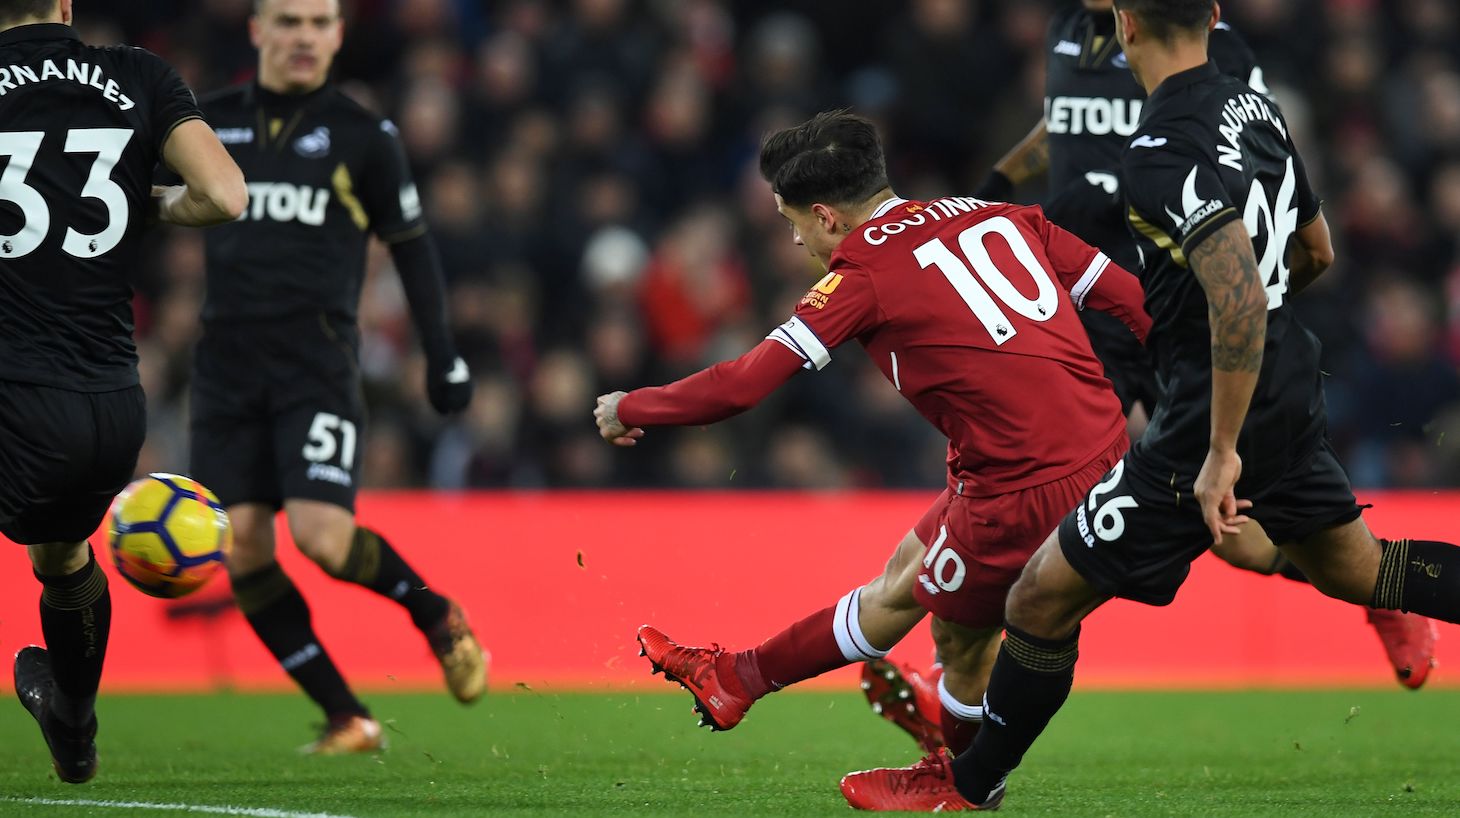 Liverpool's Brazilian midfielder Philippe Coutinho (C) shoots to score the opening goal of the English Premier League football match between Liverpool and Swansea City at Anfield in Liverpool, north west England on December 26, 2017.